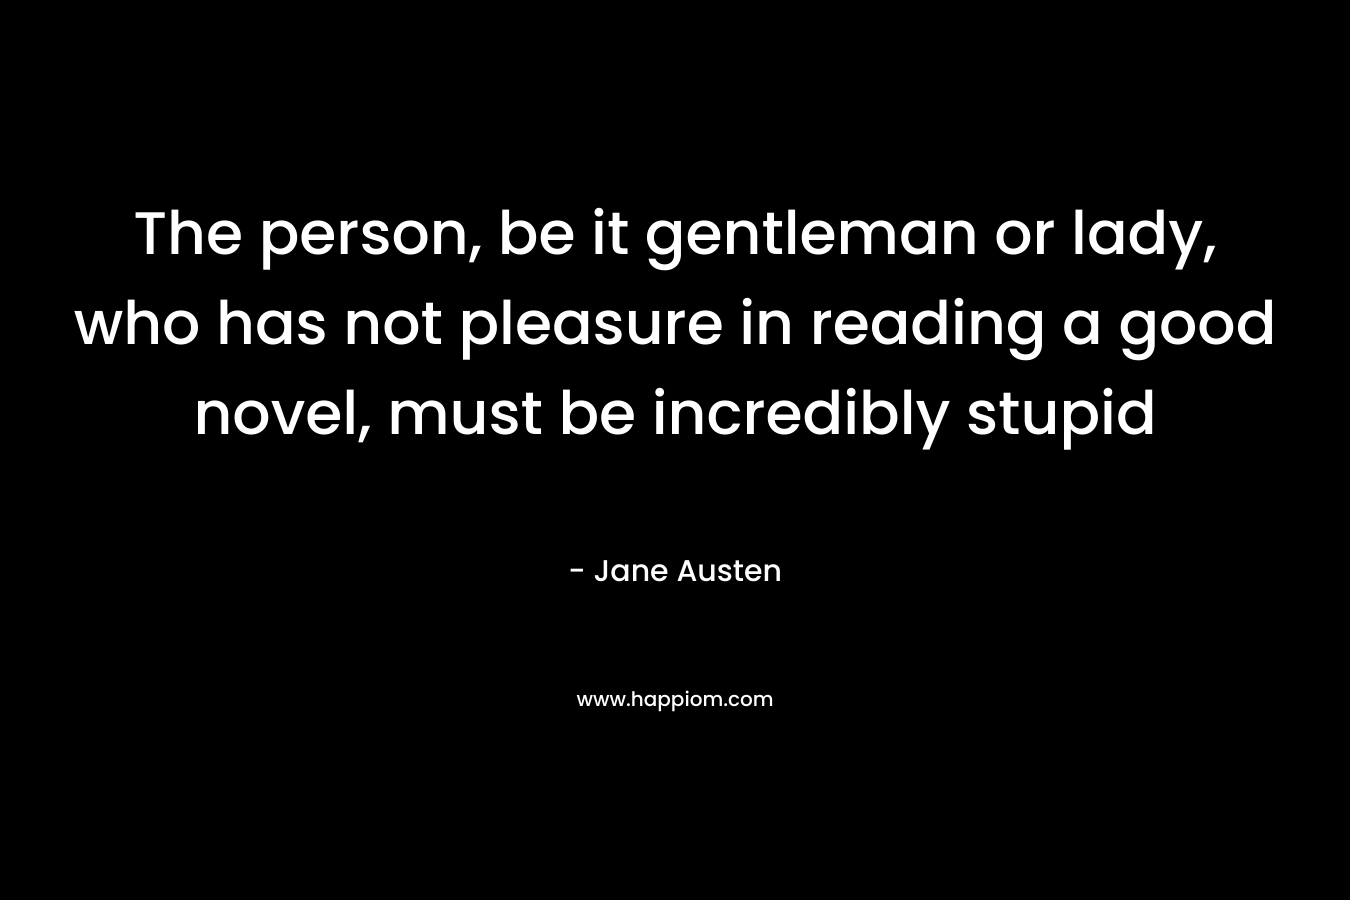 The person, be it gentleman or lady, who has not pleasure in reading a good novel, must be incredibly stupid – Jane Austen